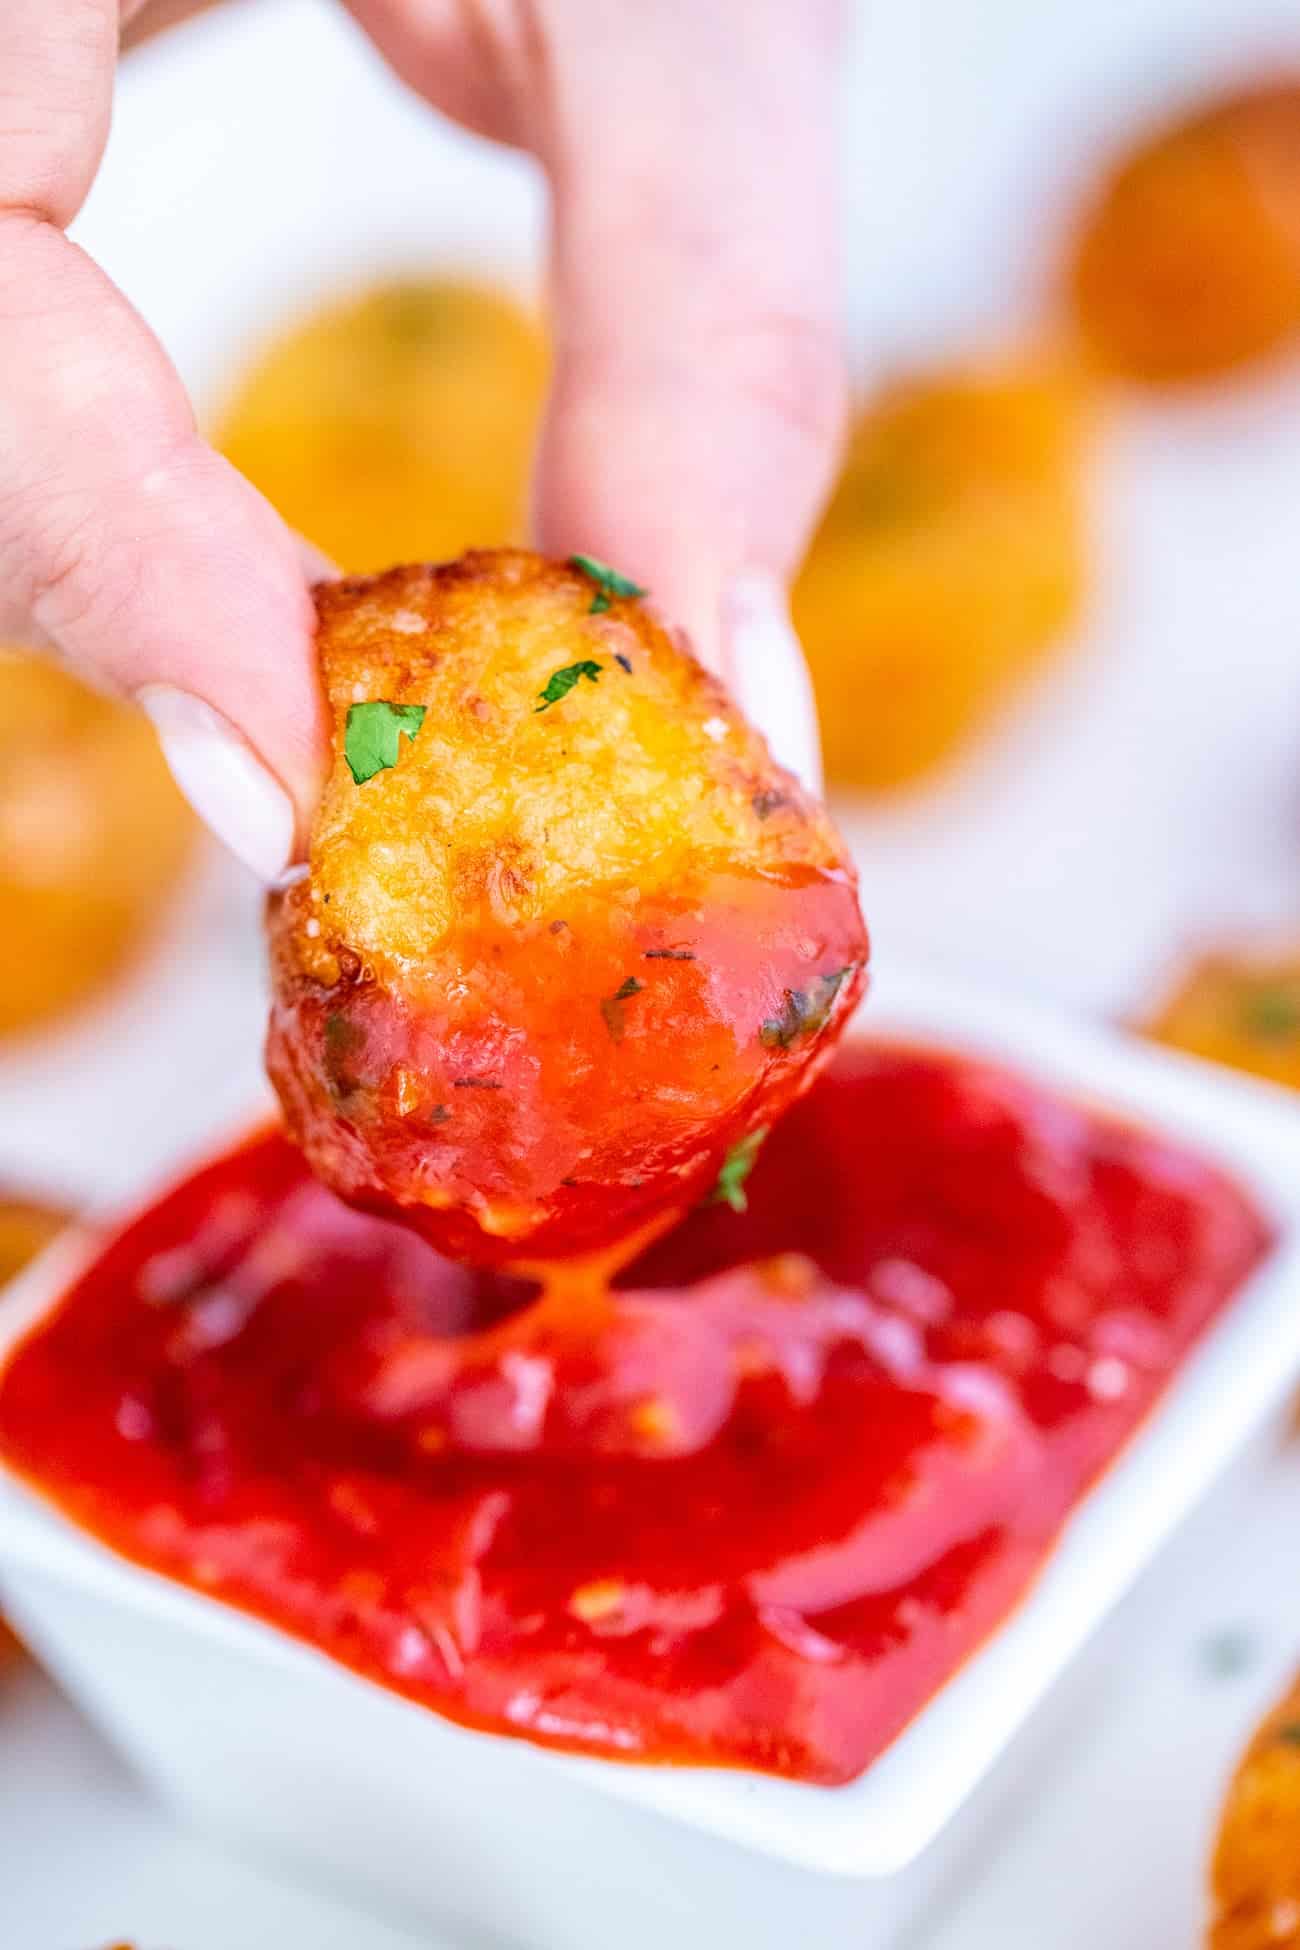 How To Make The Best Homemade Tater Tots Recipe - S&SM